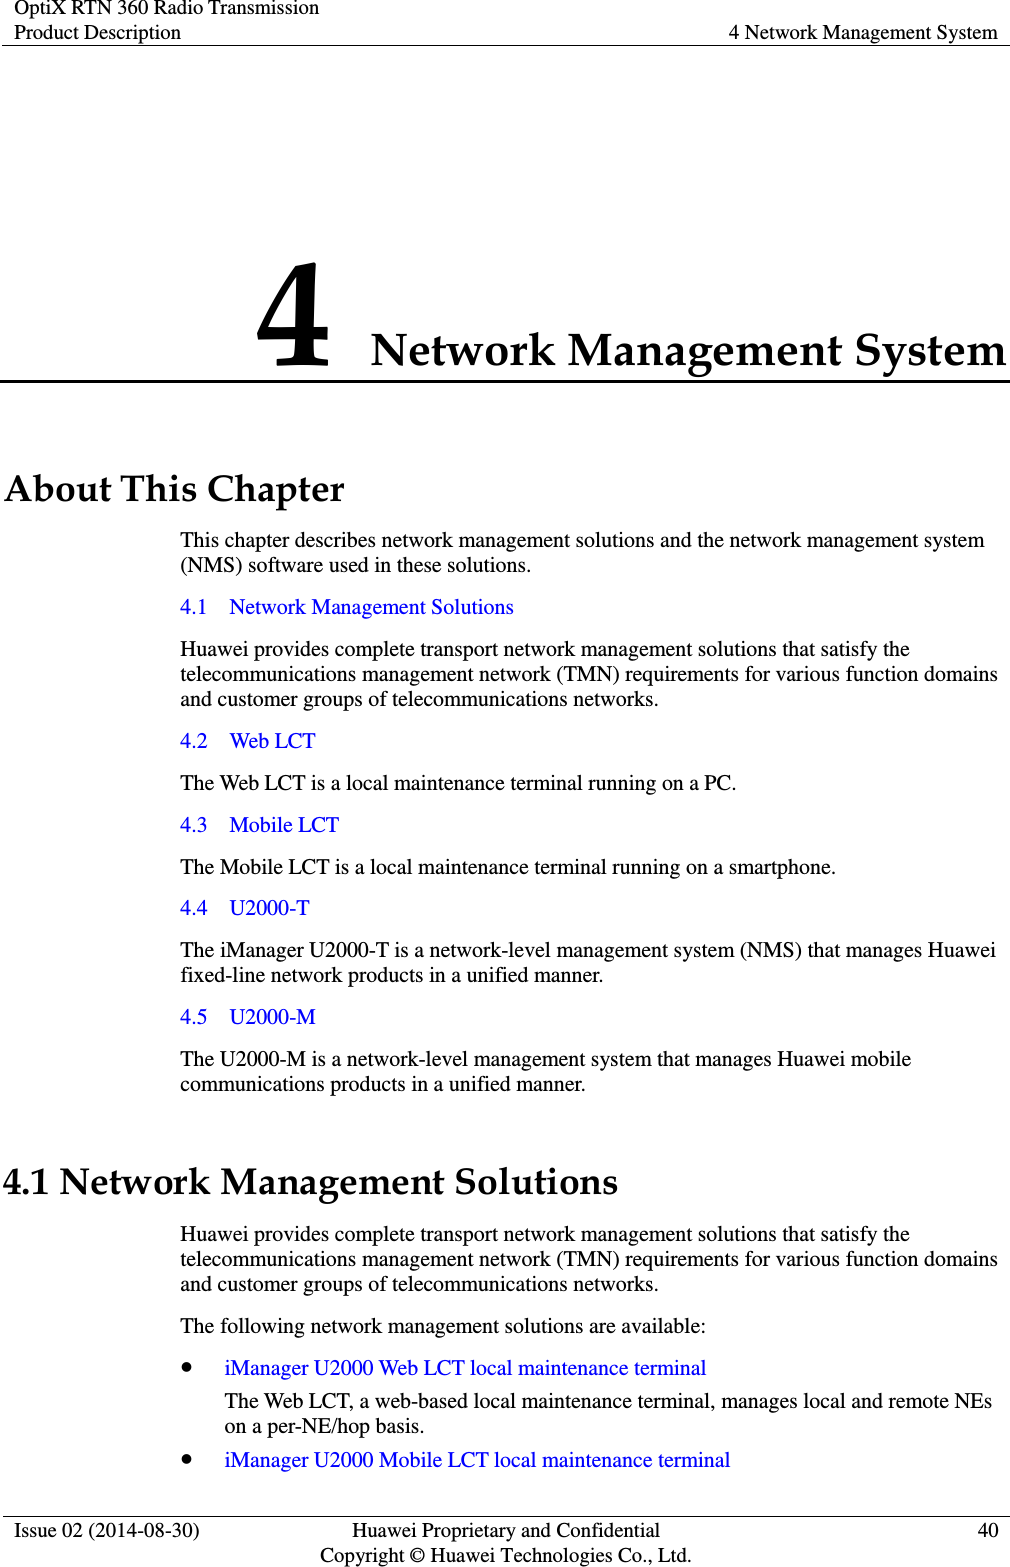 OptiX RTN 360 Radio Transmission Product Description 4 Network Management System  Issue 02 (2014-08-30) Huawei Proprietary and Confidential                                     Copyright © Huawei Technologies Co., Ltd. 40  4 Network Management System About This Chapter This chapter describes network management solutions and the network management system (NMS) software used in these solutions. 4.1    Network Management Solutions Huawei provides complete transport network management solutions that satisfy the telecommunications management network (TMN) requirements for various function domains and customer groups of telecommunications networks. 4.2    Web LCT The Web LCT is a local maintenance terminal running on a PC. 4.3    Mobile LCT The Mobile LCT is a local maintenance terminal running on a smartphone. 4.4    U2000-T The iManager U2000-T is a network-level management system (NMS) that manages Huawei fixed-line network products in a unified manner. 4.5    U2000-M The U2000-M is a network-level management system that manages Huawei mobile communications products in a unified manner. 4.1 Network Management Solutions Huawei provides complete transport network management solutions that satisfy the telecommunications management network (TMN) requirements for various function domains and customer groups of telecommunications networks. The following network management solutions are available:  iManager U2000 Web LCT local maintenance terminal The Web LCT, a web-based local maintenance terminal, manages local and remote NEs on a per-NE/hop basis.  iManager U2000 Mobile LCT local maintenance terminal 